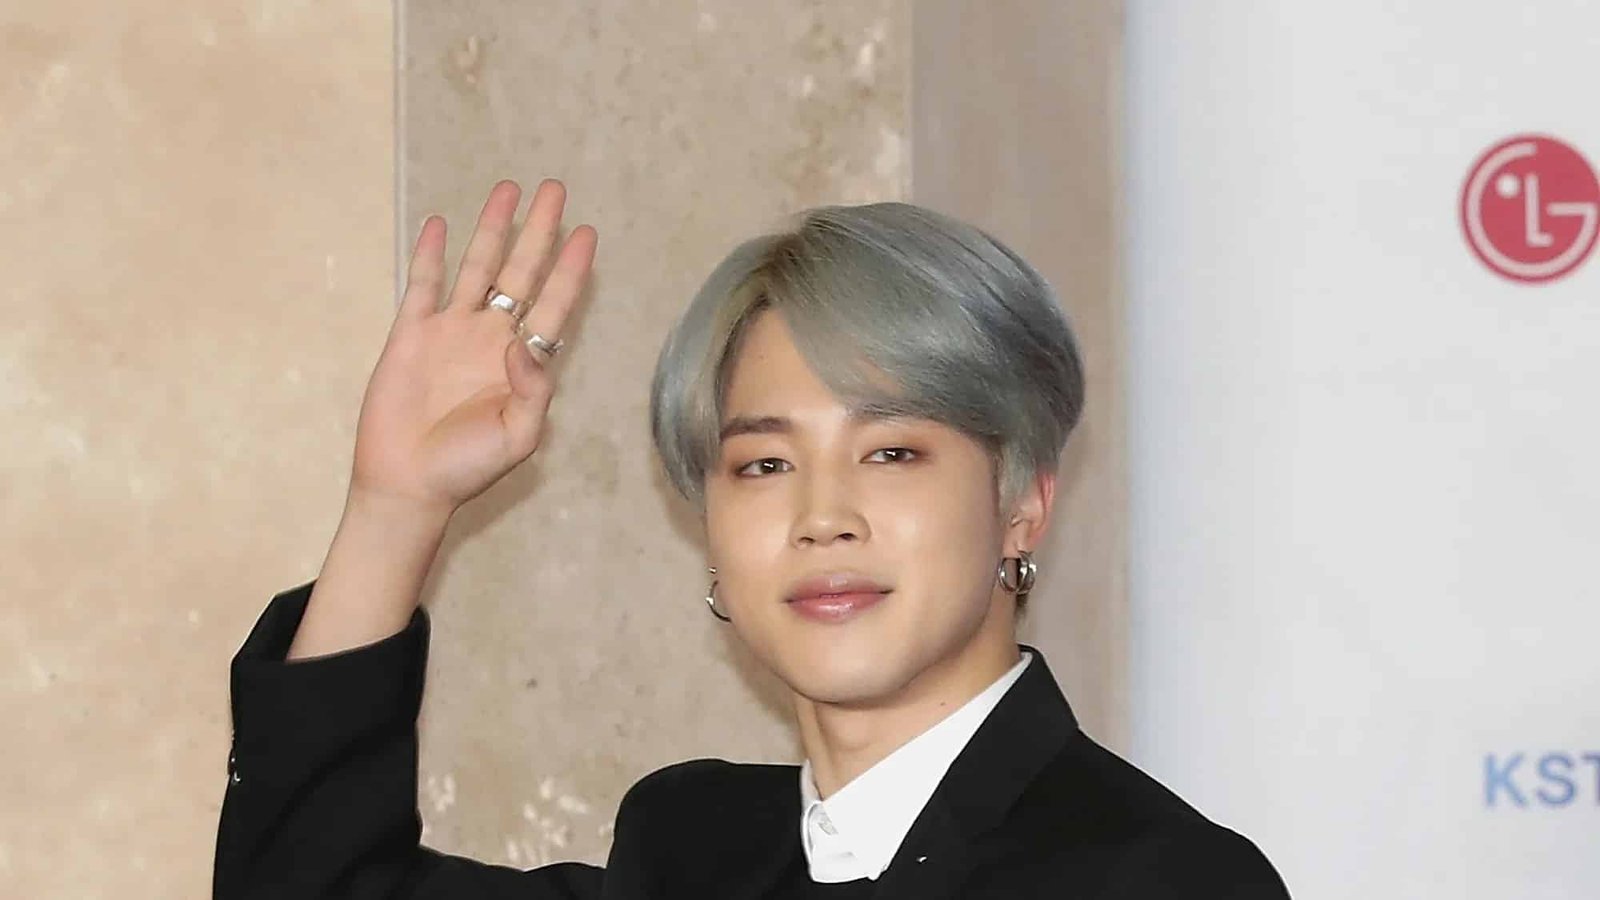 BTS member Jimin, his father receive death threats, here's why